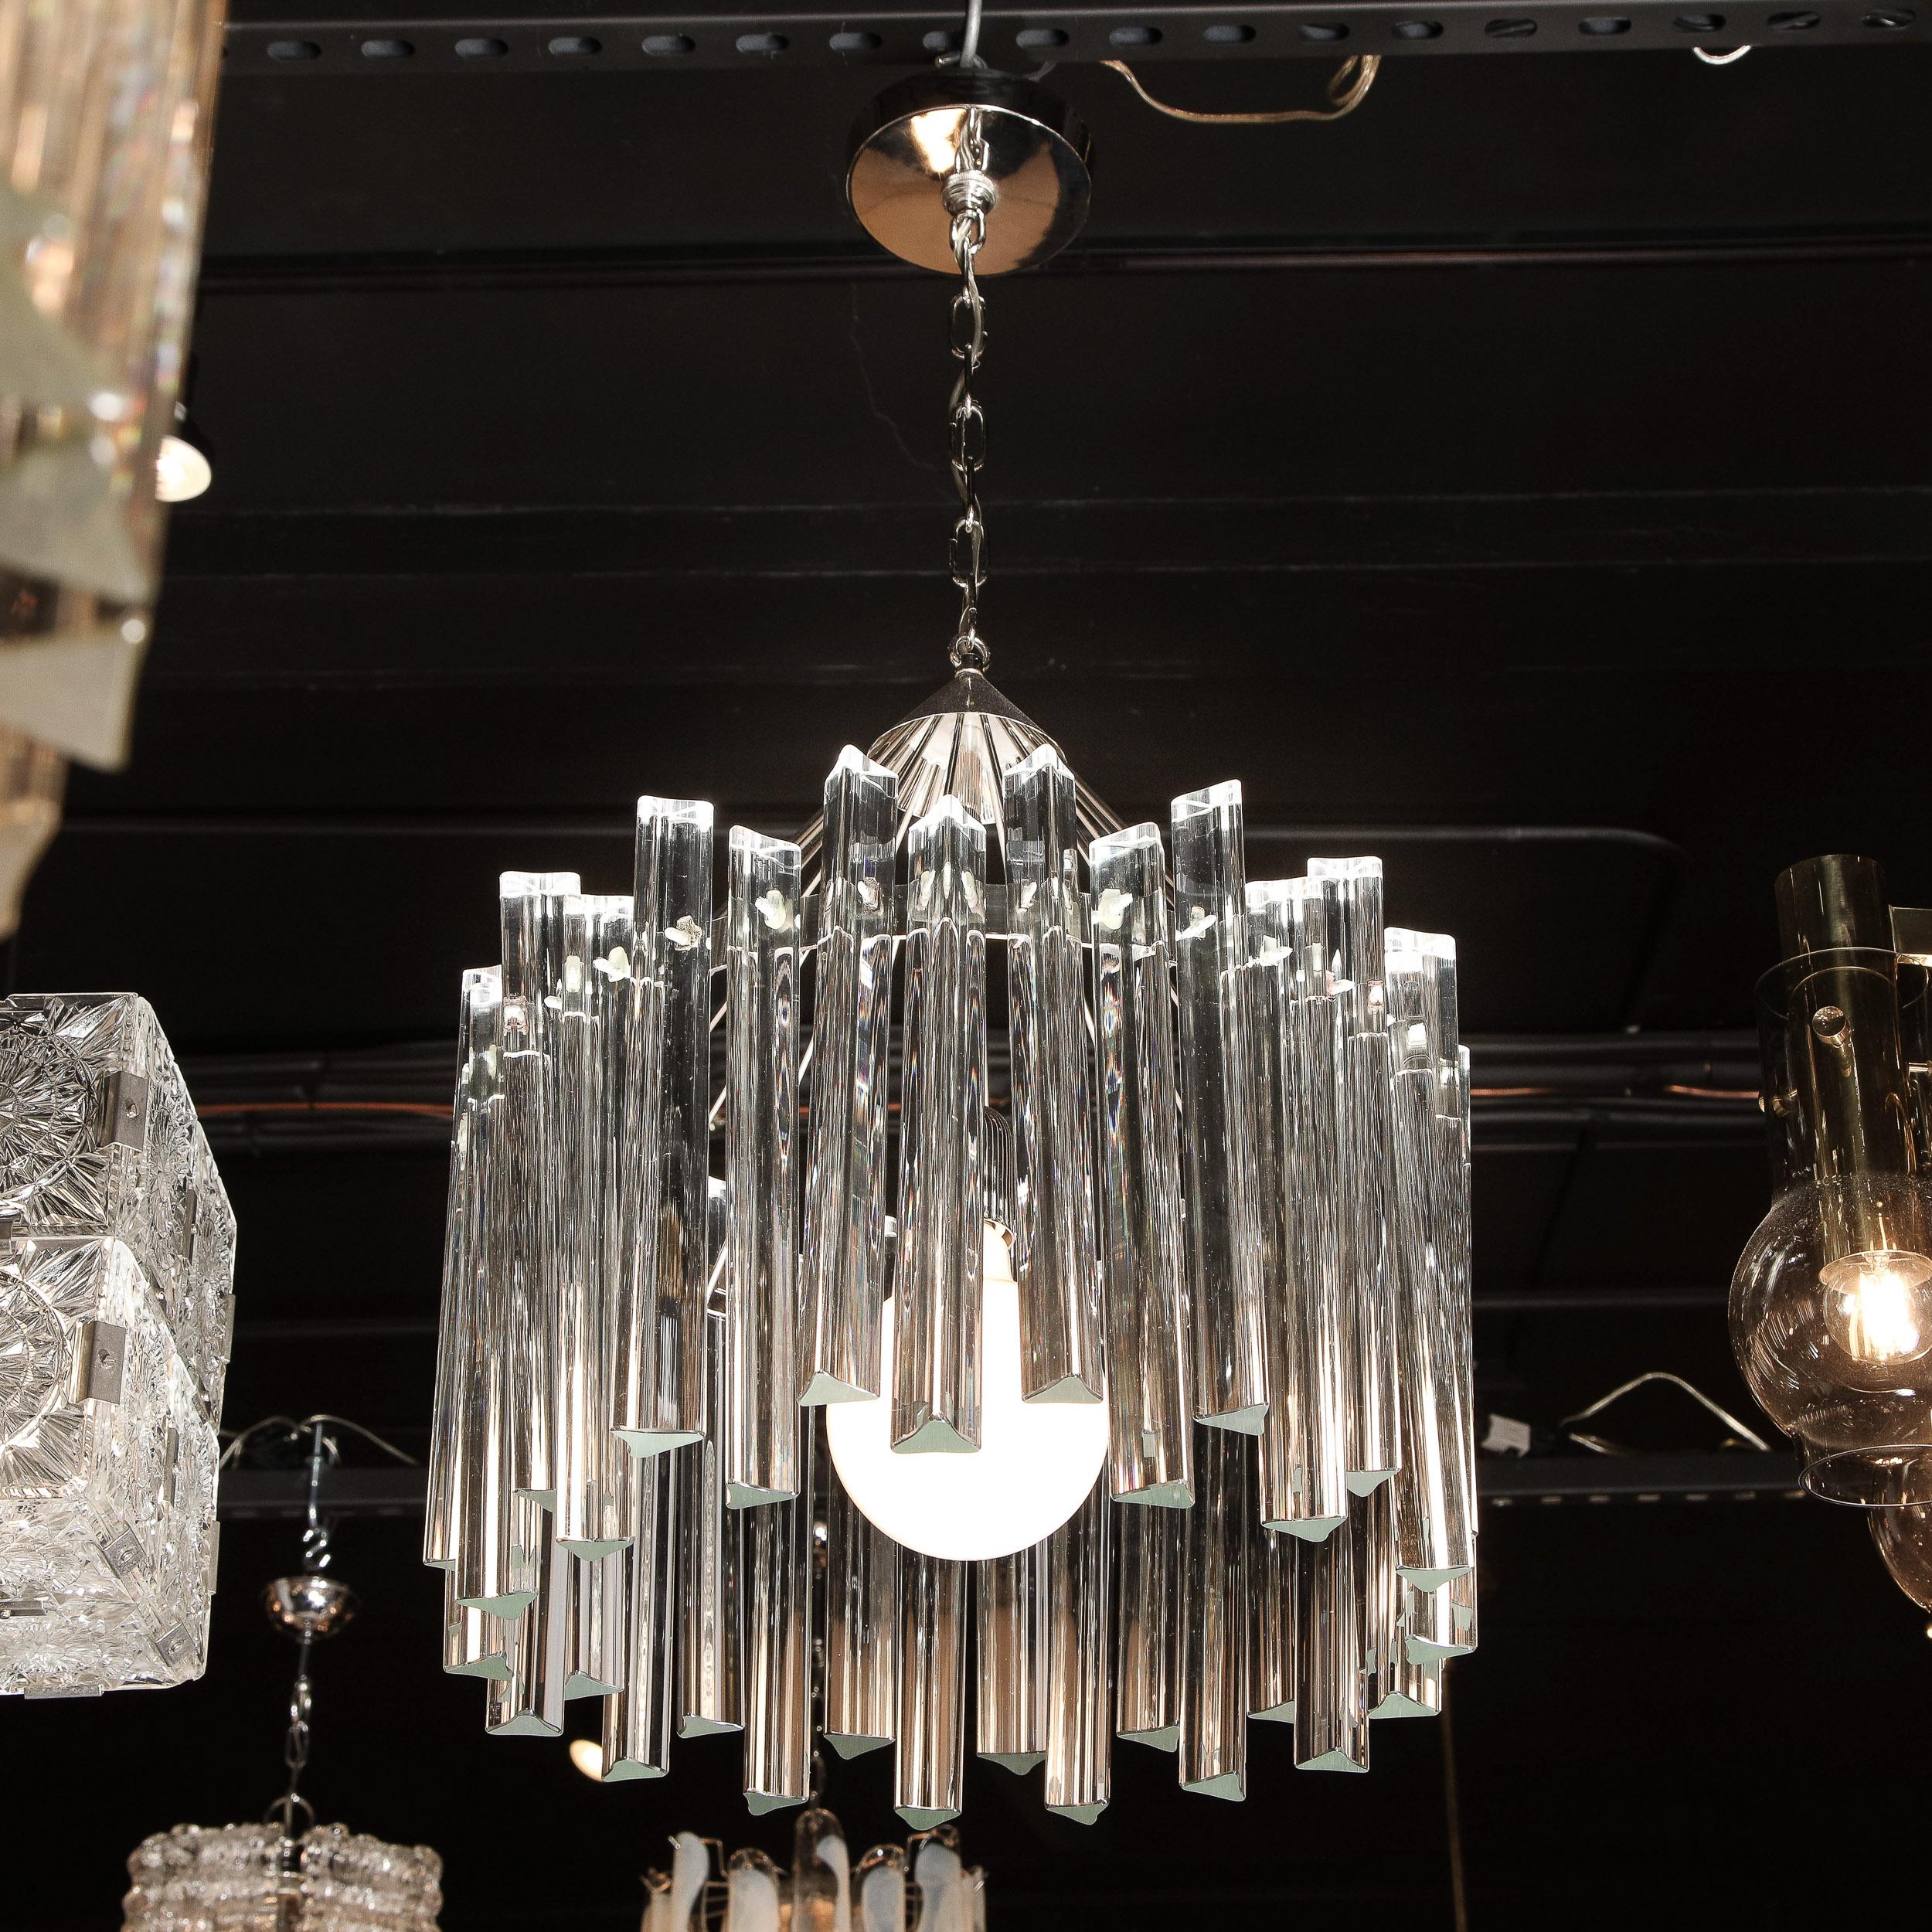 This stunning Mid-Century Modern chandelier was realized in Murano, Italy circa 1970. It features a circular open form frame in lustrous polished chrome. with a wealth of translucent handblown Murano triedre crystals suspended around the perimeter.